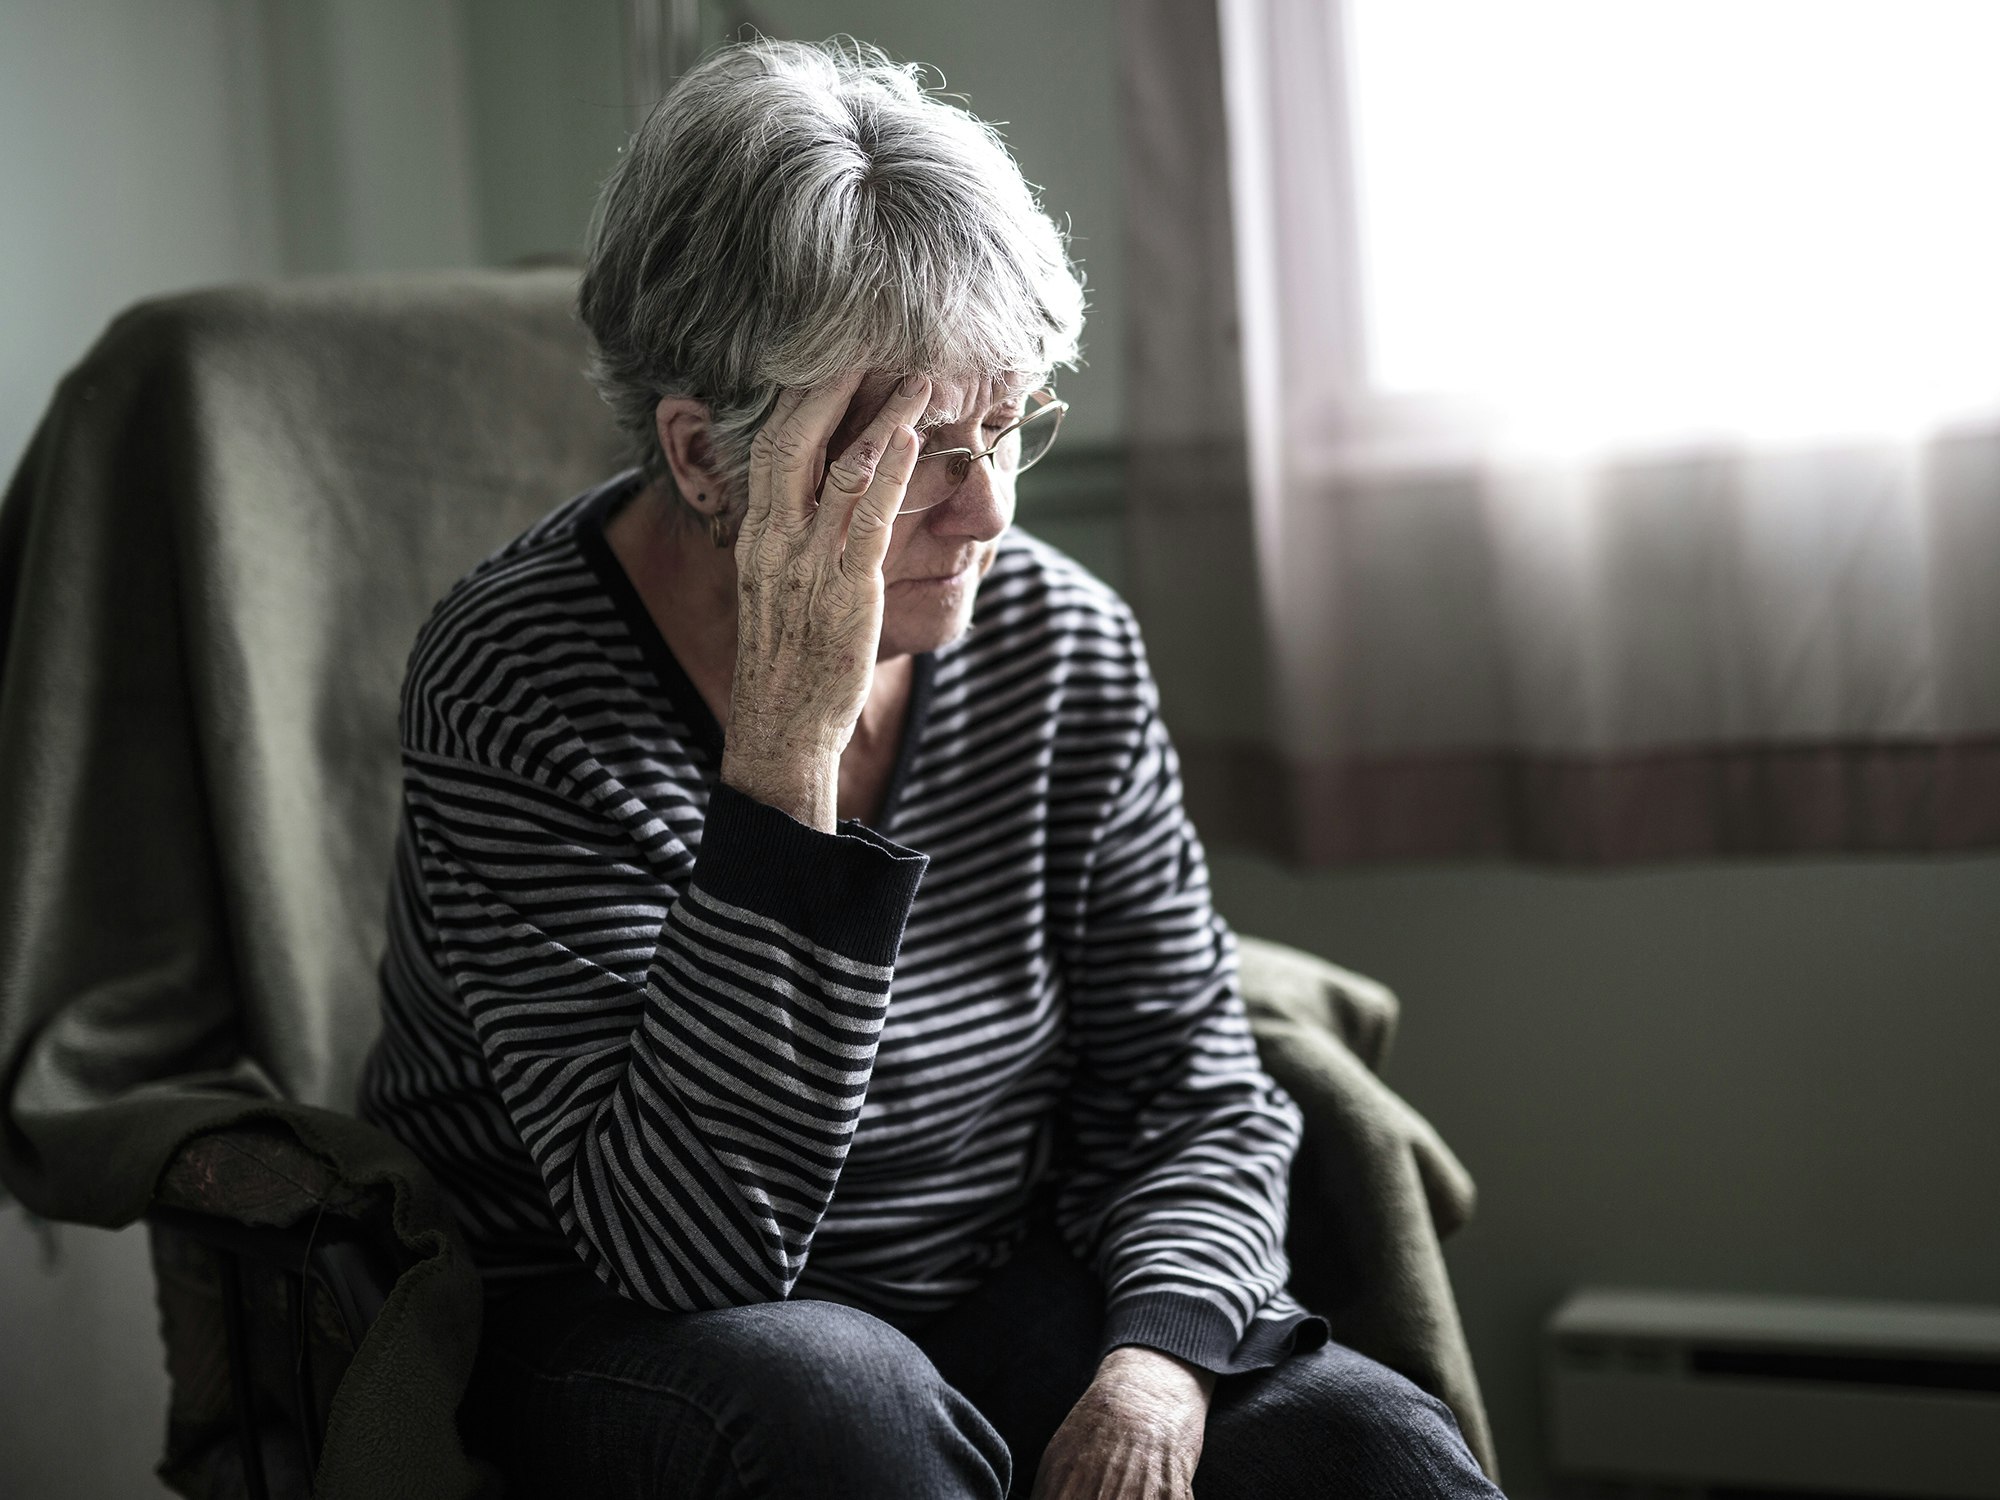 Good mental health is a “key factor” associated with healthy ageing (Source: Shutterstock)
